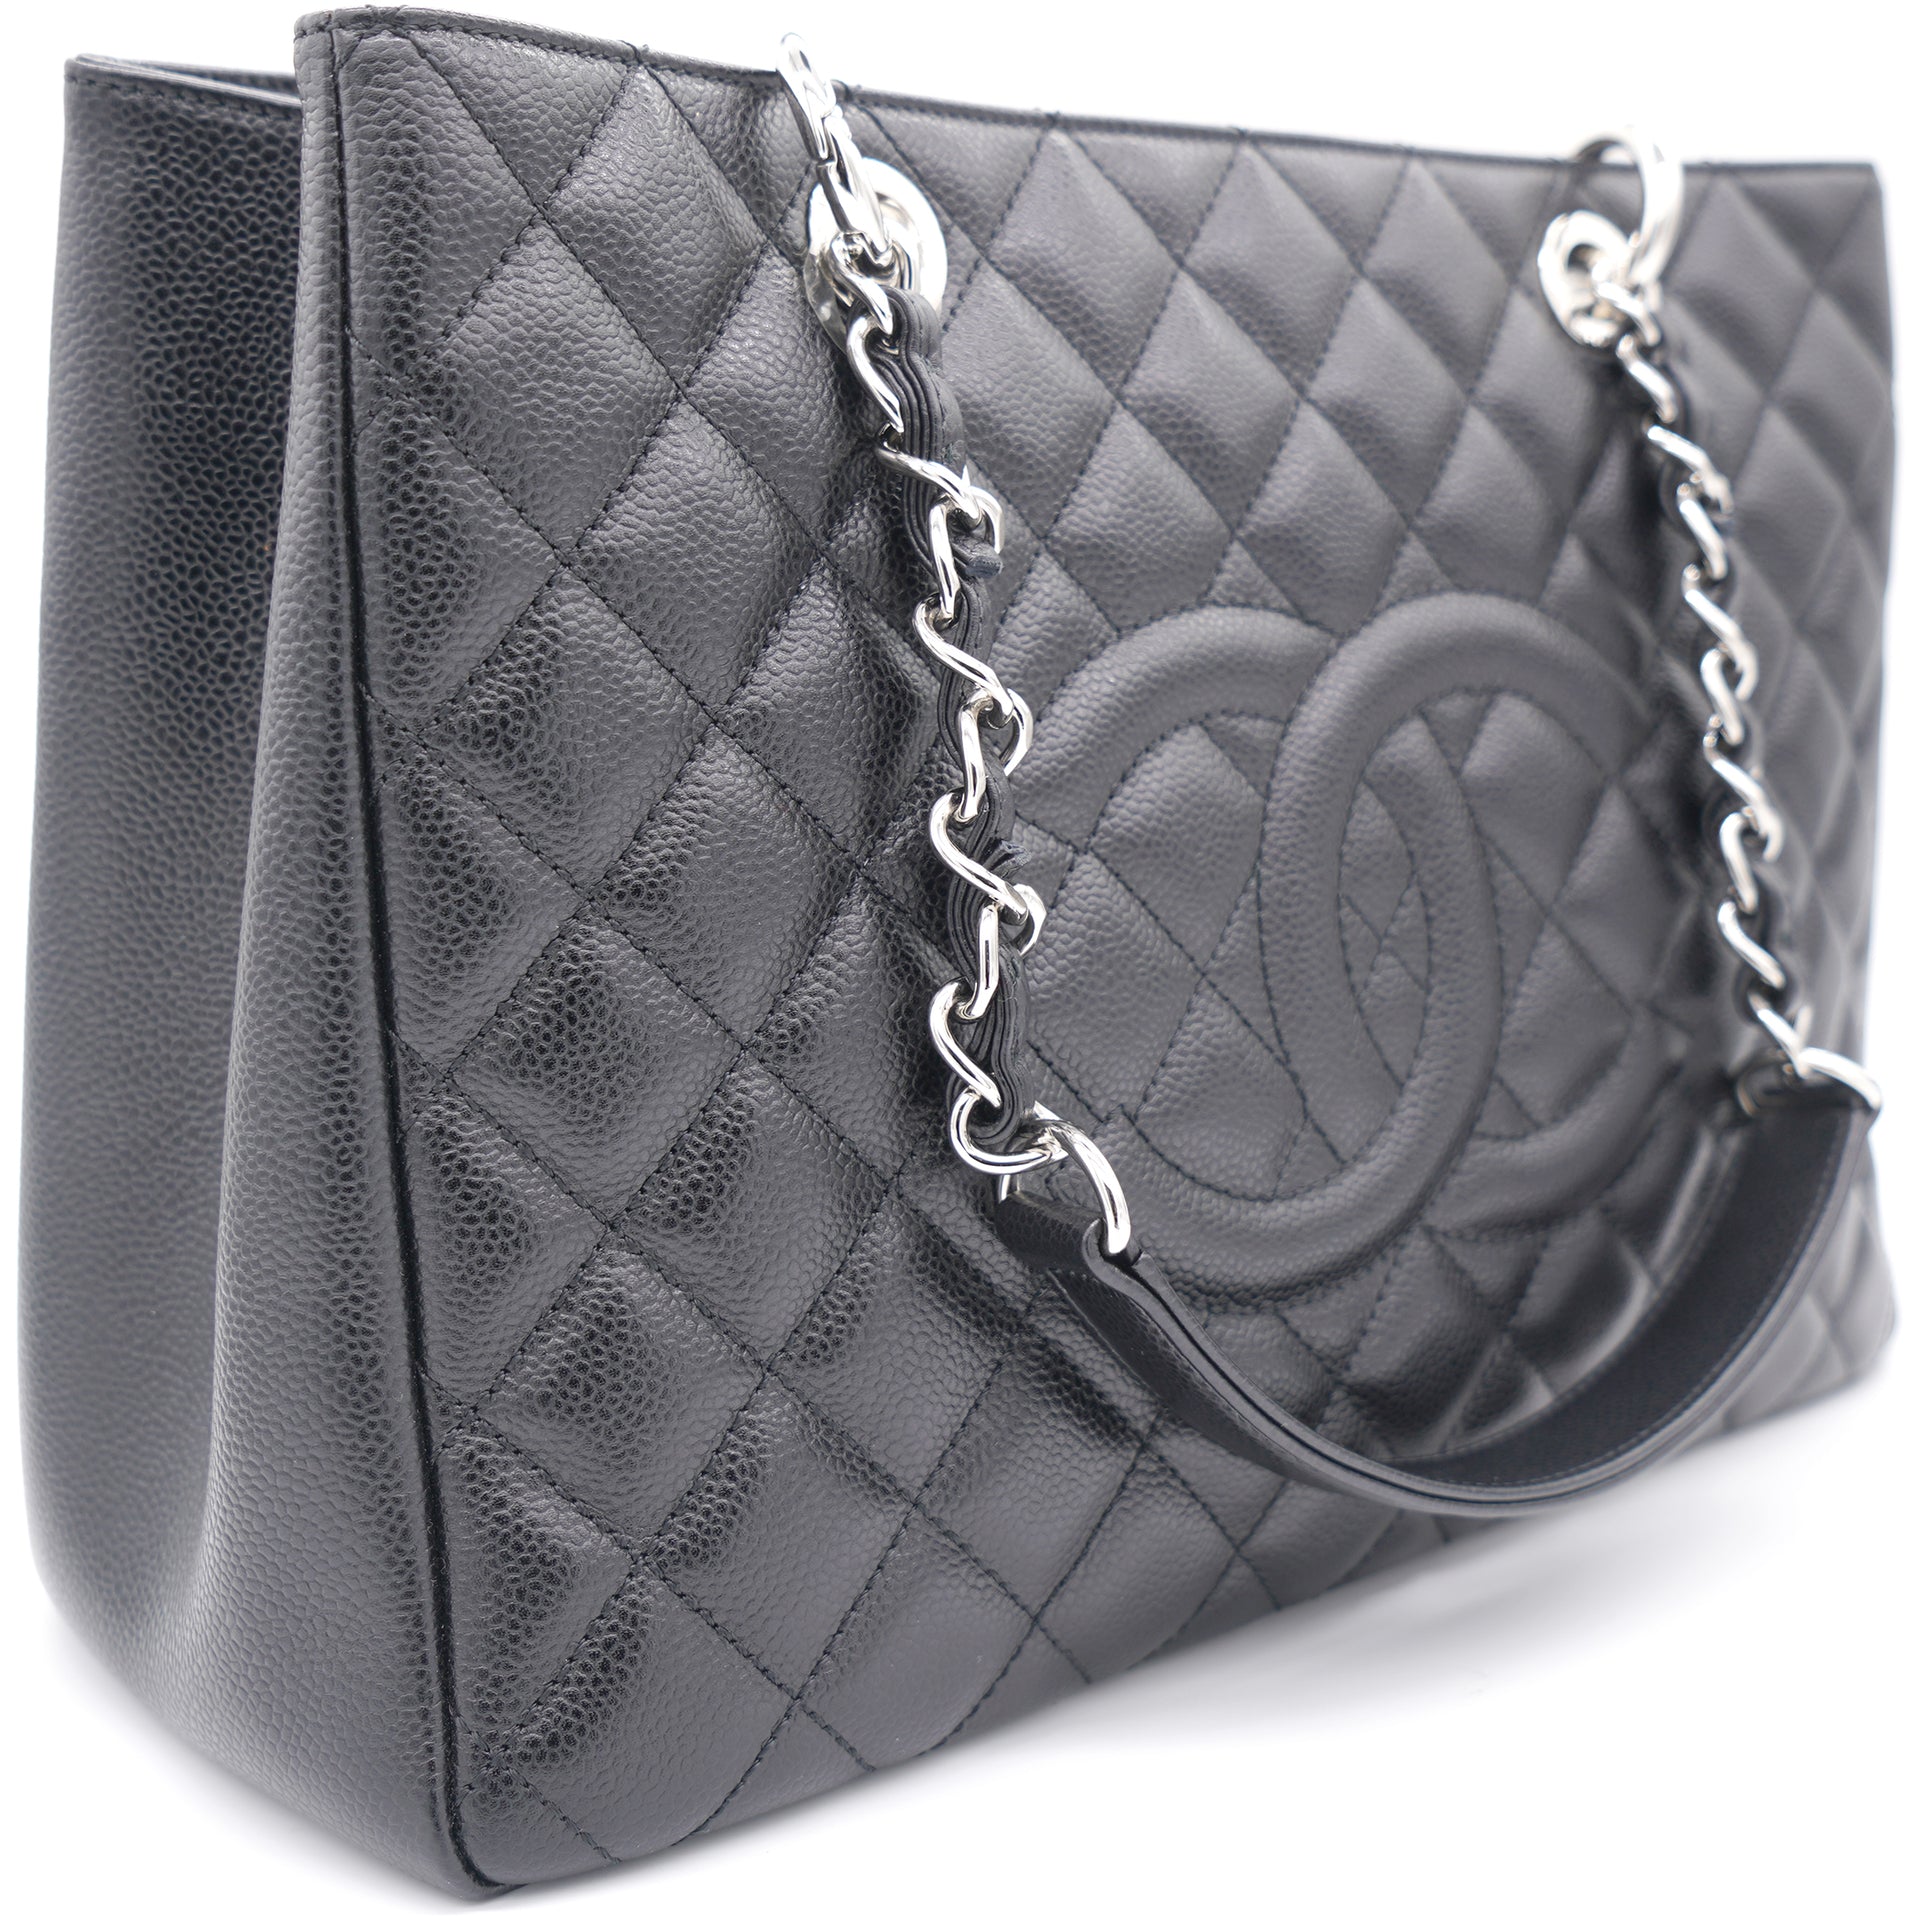 Chanel Patent Grand Shopping Tote in Black